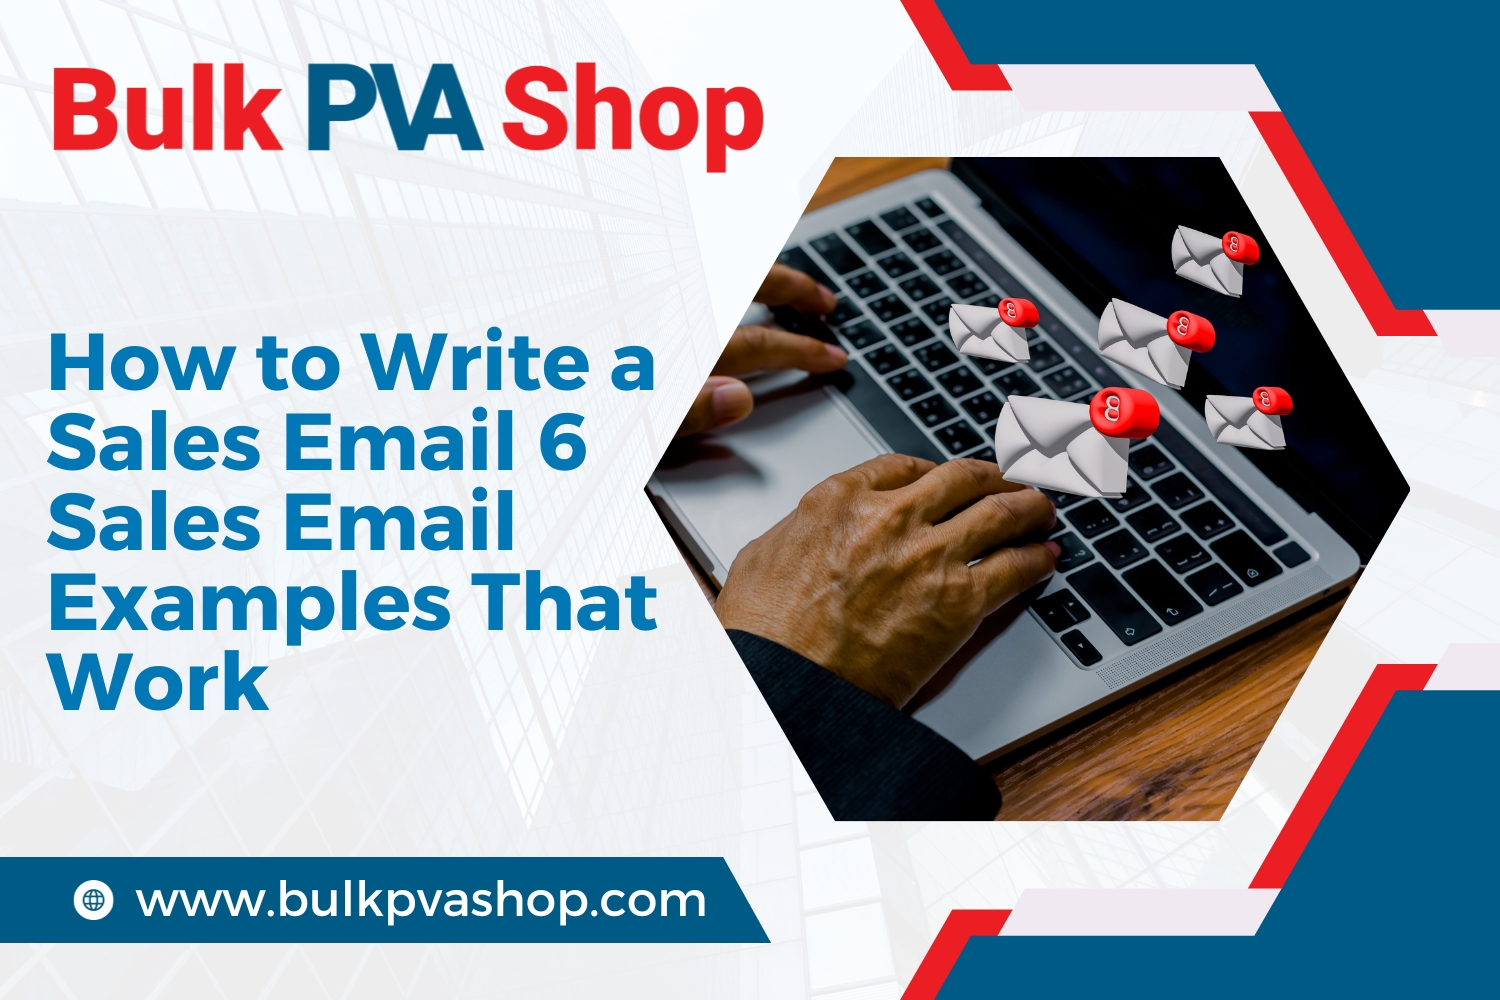 How to Write a Sales Email: 6 Sales Email Examples That Work